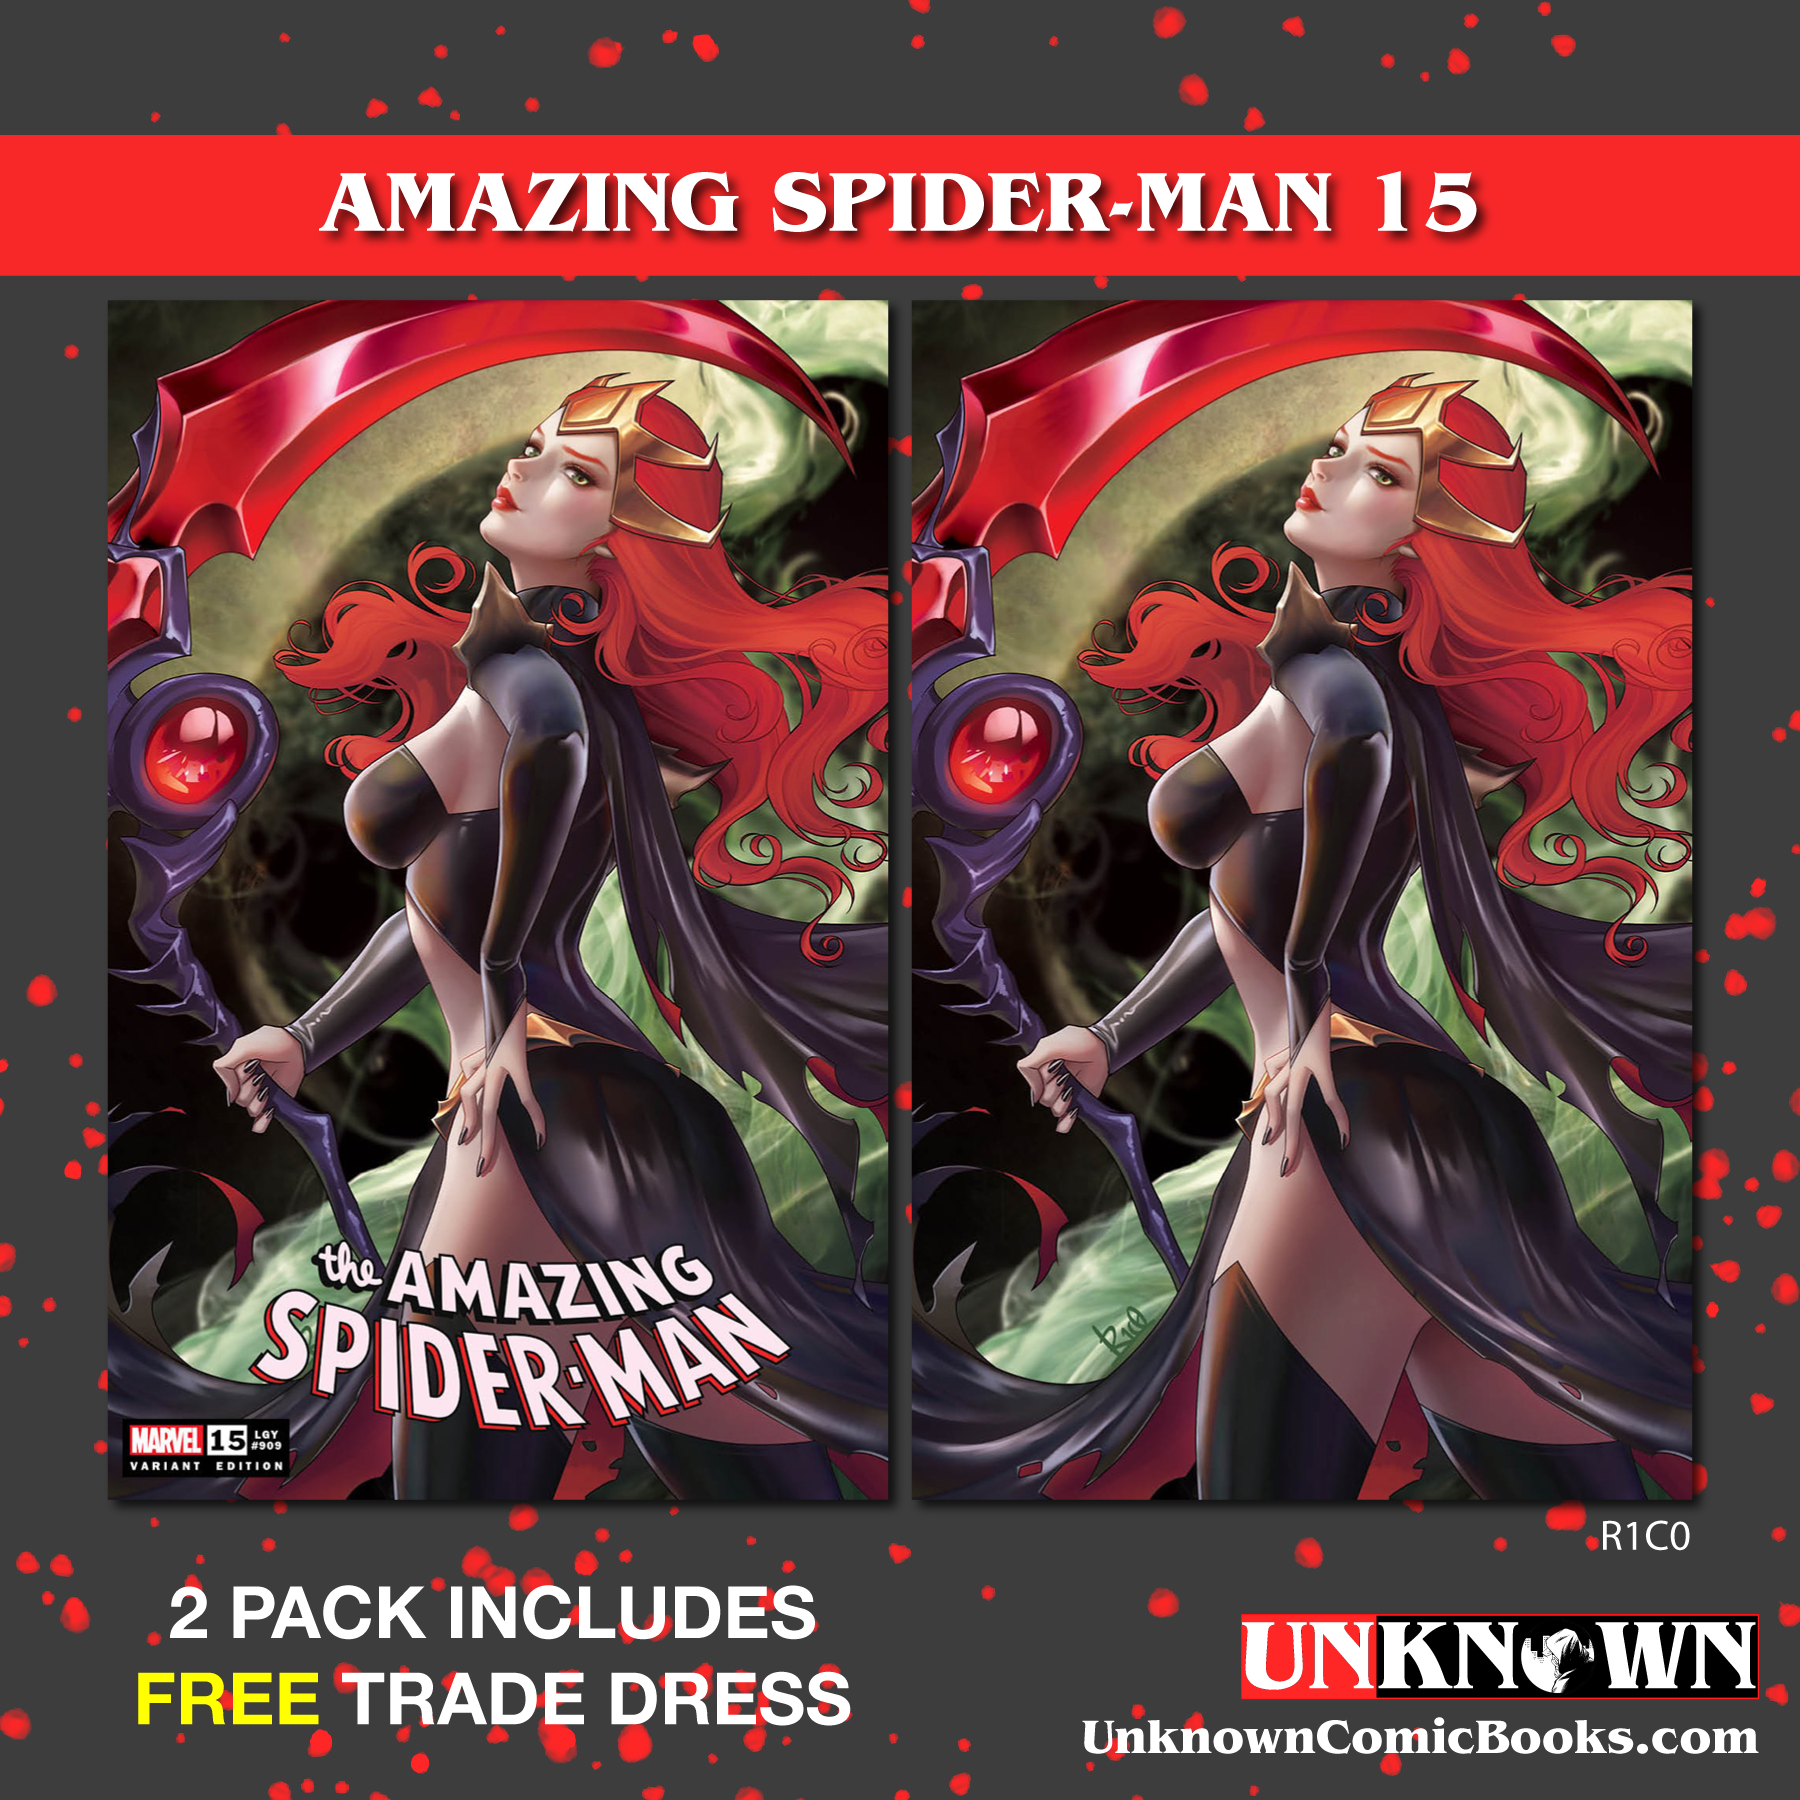 2 PACK **FREE TRADE DRESS** AMAZING SPIDER-MAN #15 [DWB] UNKNOWN COMICS R1C0 EXCLUSIVE VAR (12/14/2022)